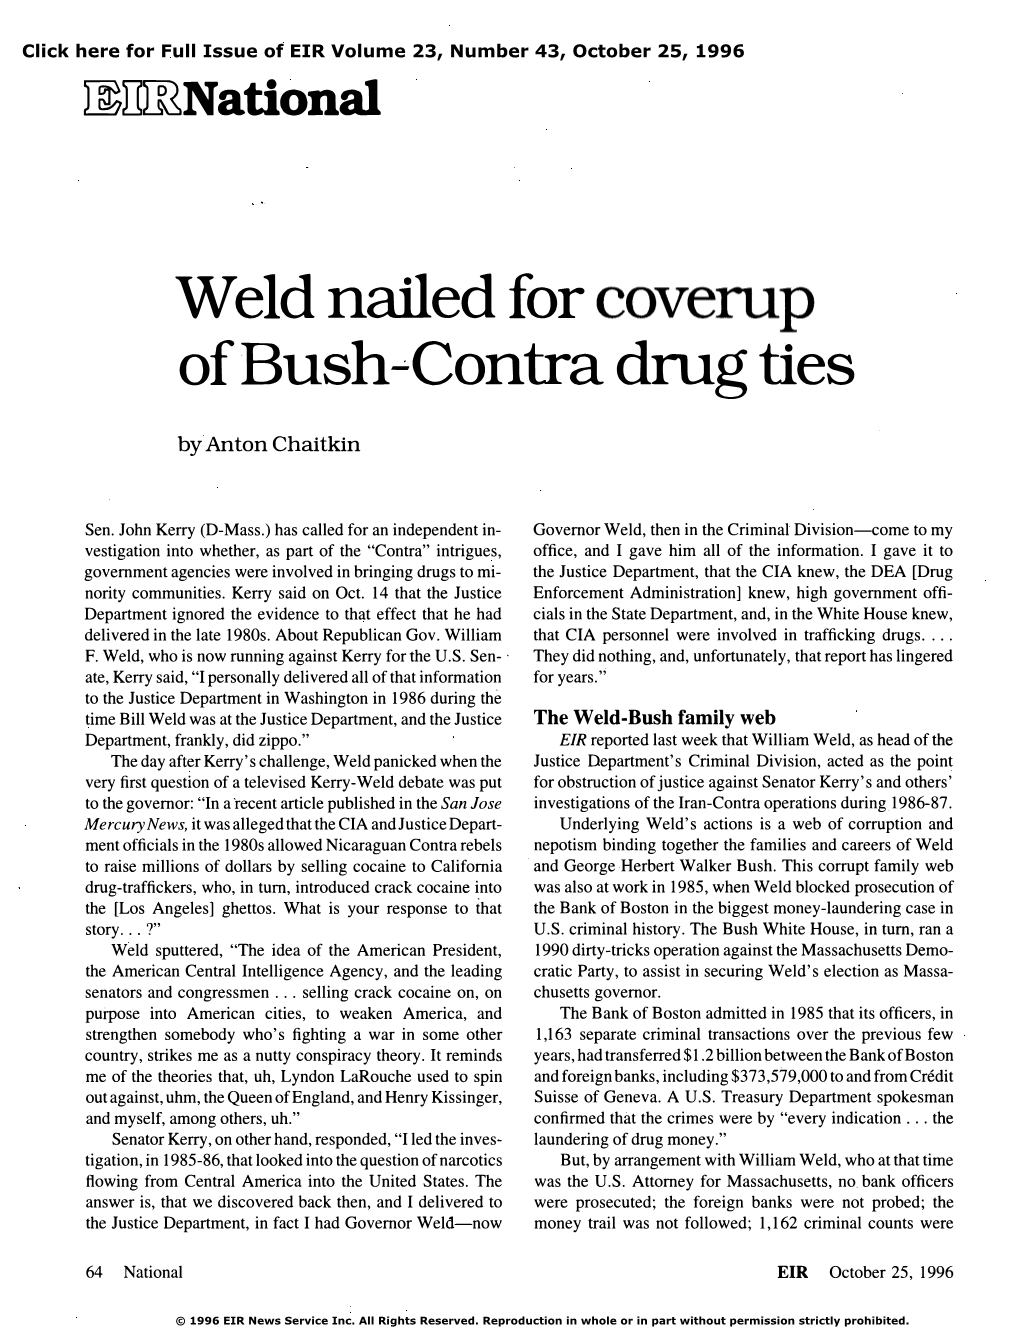 Weld Nailed for Coverup of Bush-Contra Drug Ties